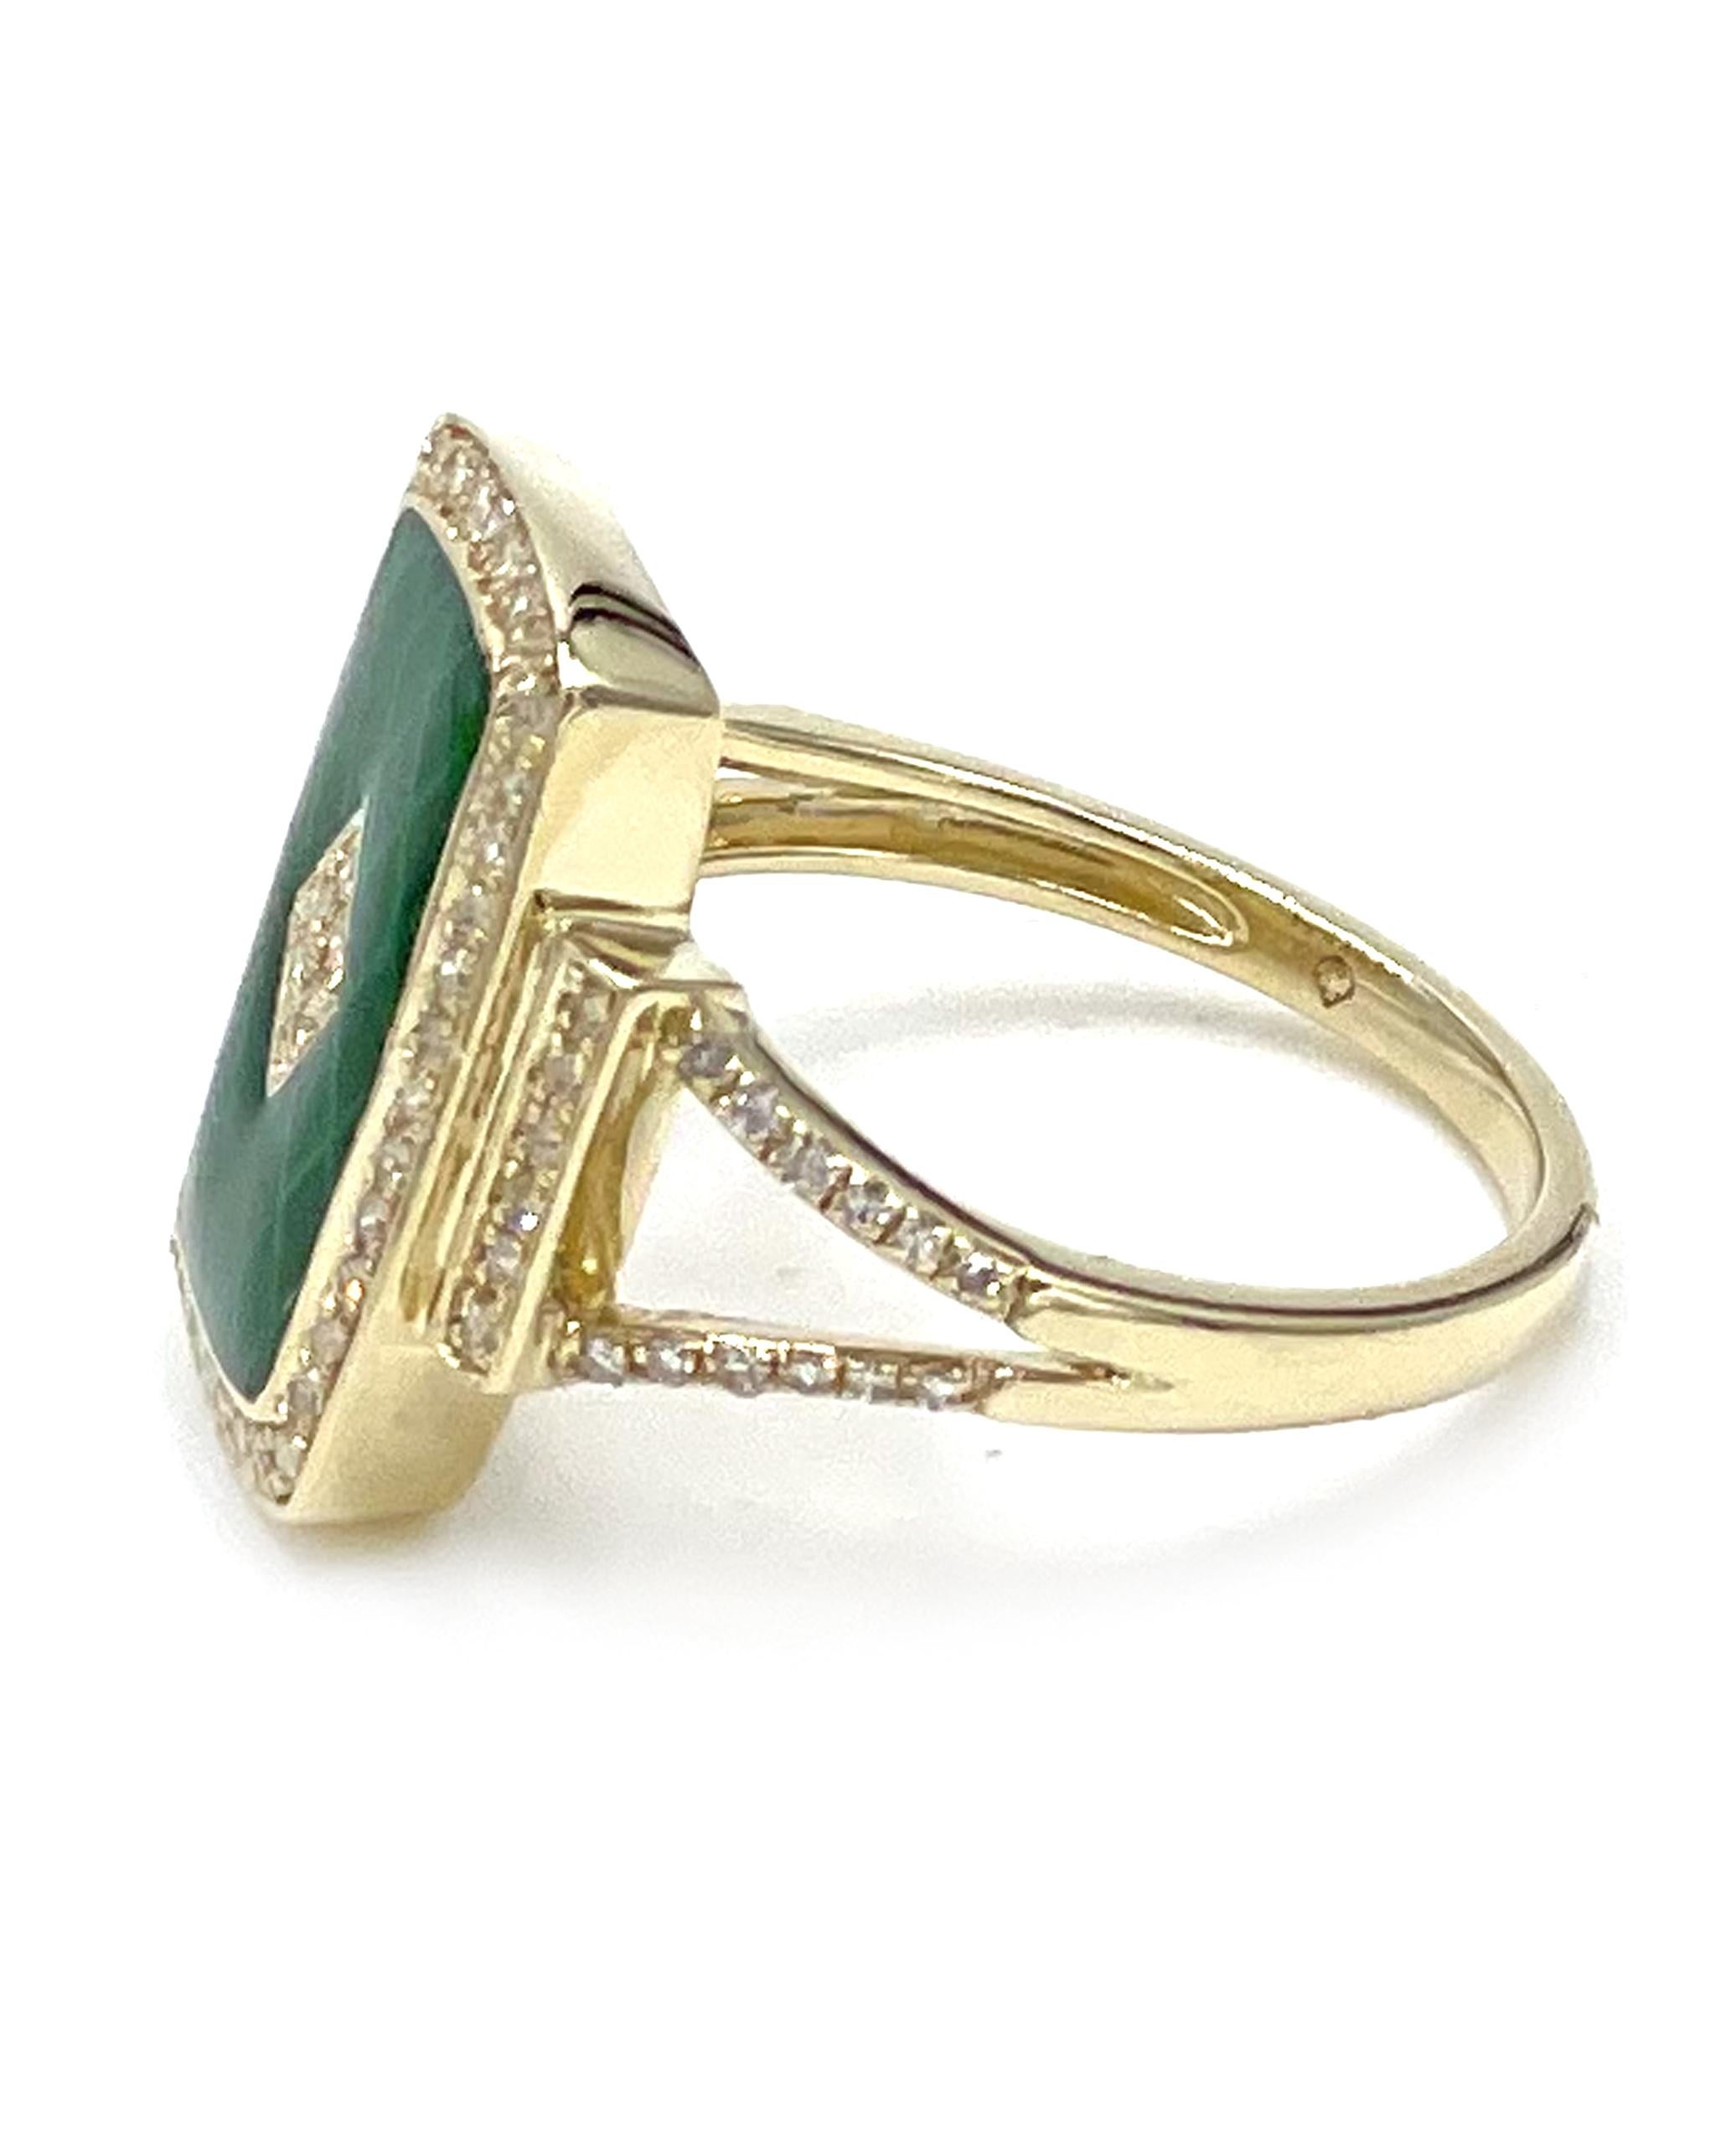 14K yellow gold rectangular ring with 82 round single cut diamonds 0.22 carats total weight. The center is finished with green enamel.

* Finger size 6.5 (can be sized)
* Diamonds are H/I color, SI1 clarity.